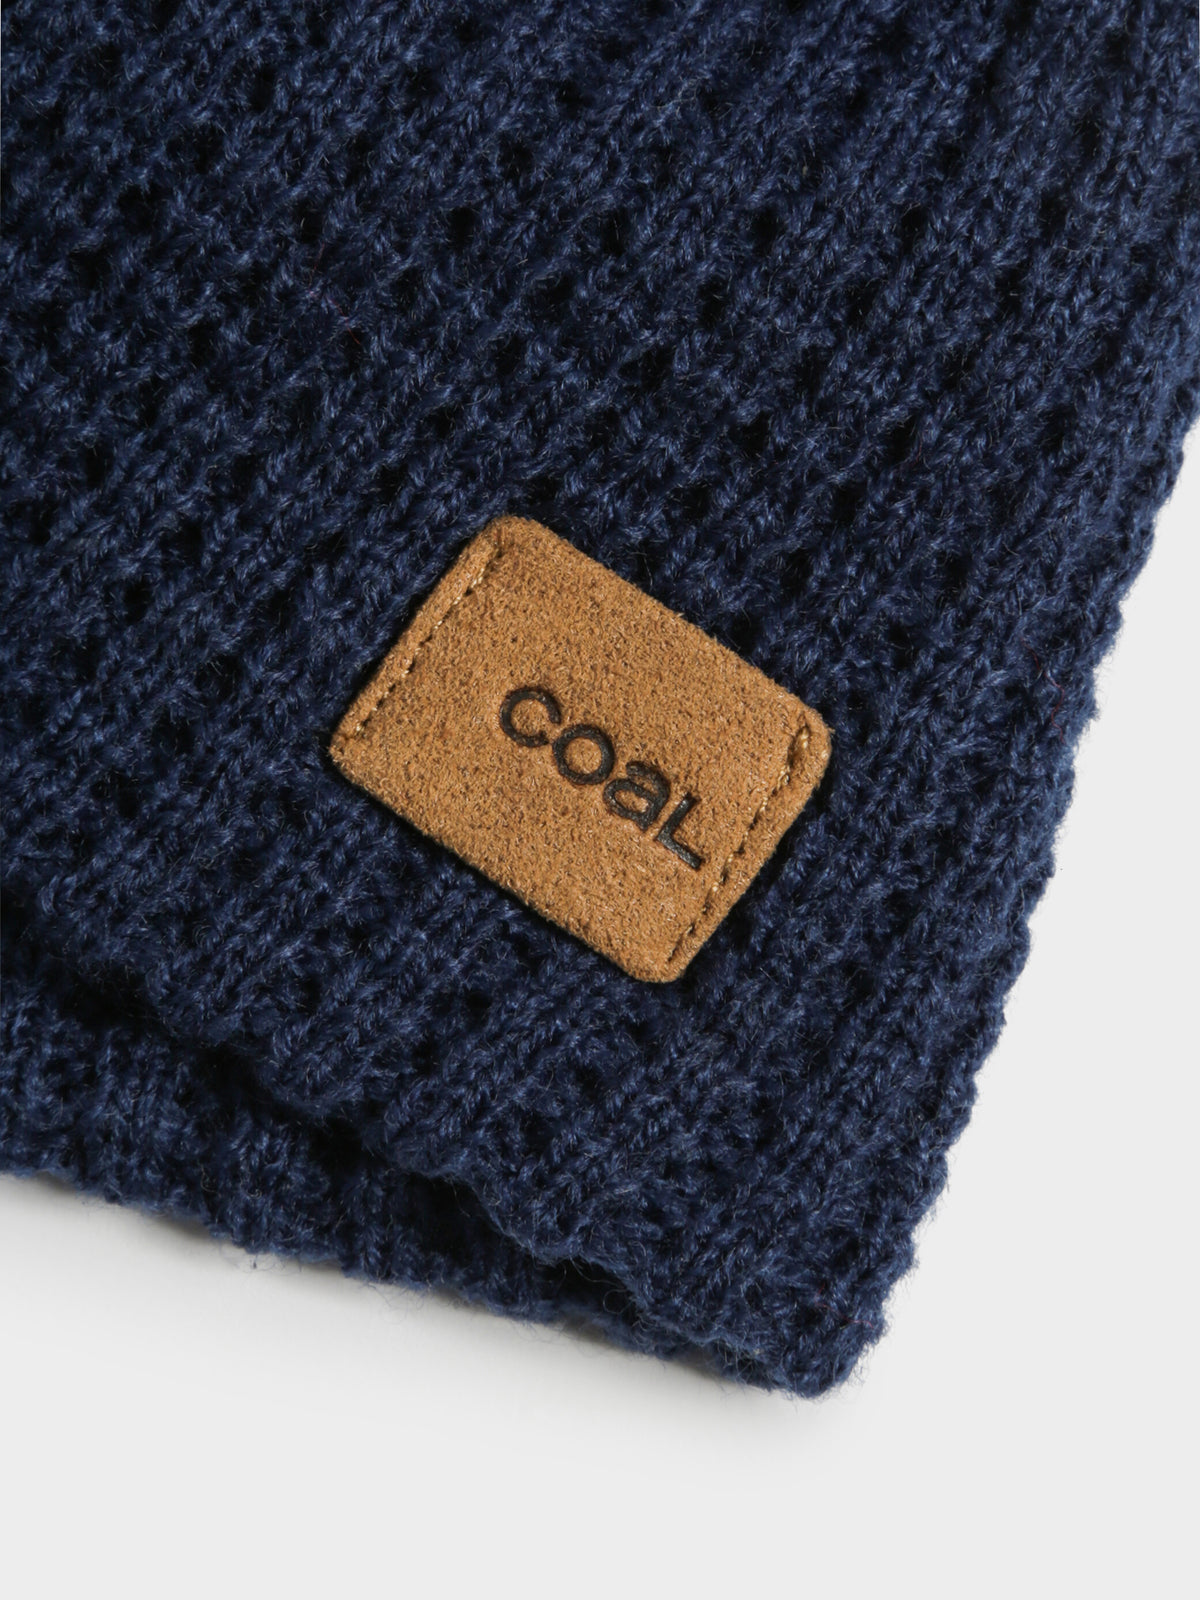 The Soma Beanie in Navy